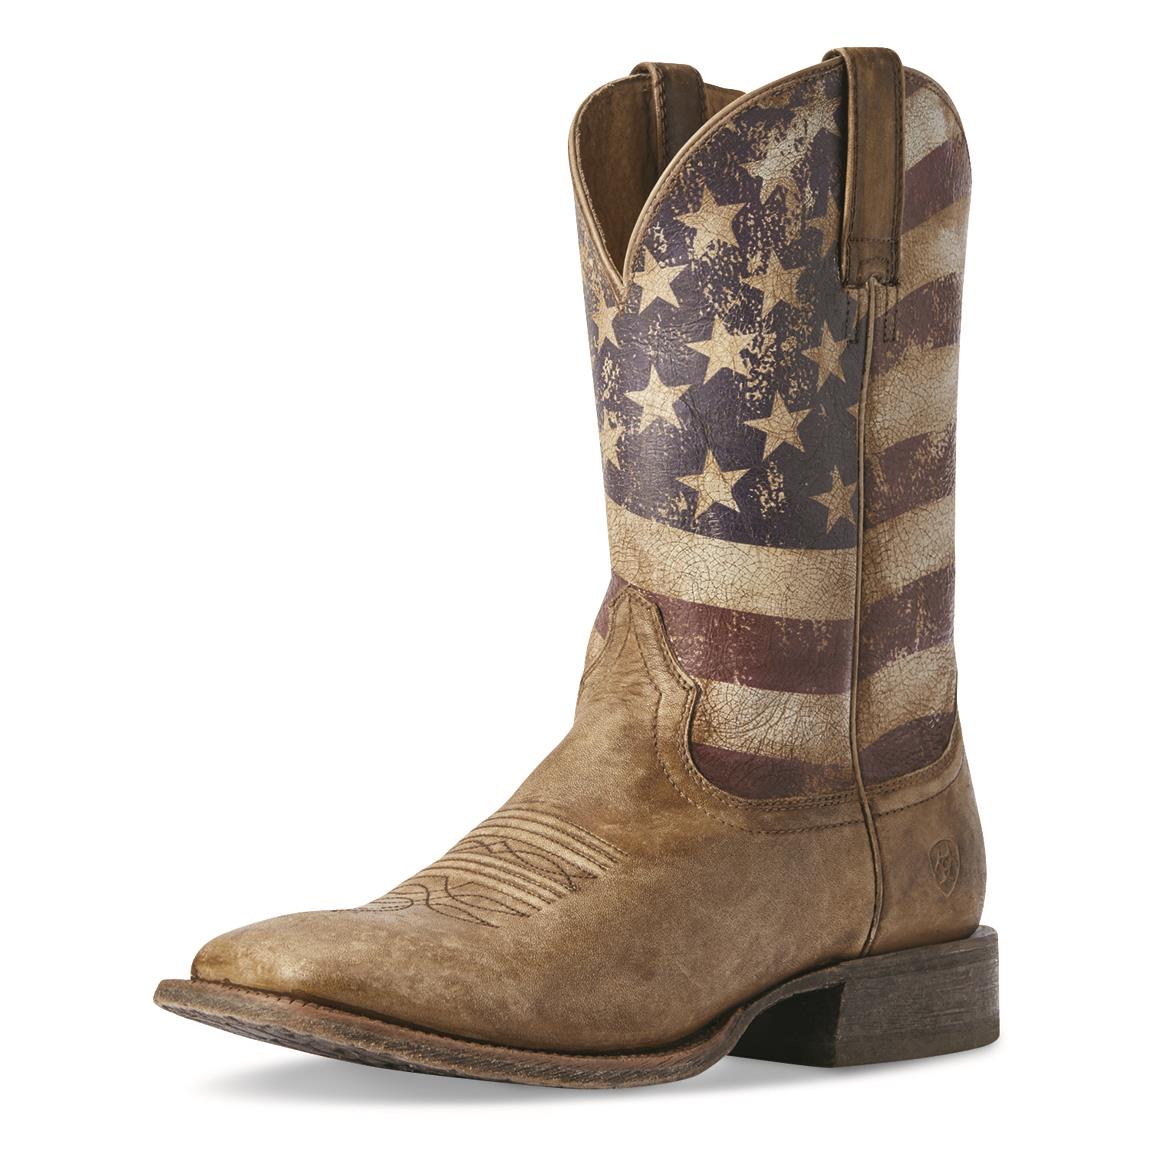 Ariat Men's Circuit Proud Western Boots, Distressed Brown/distressed Flag